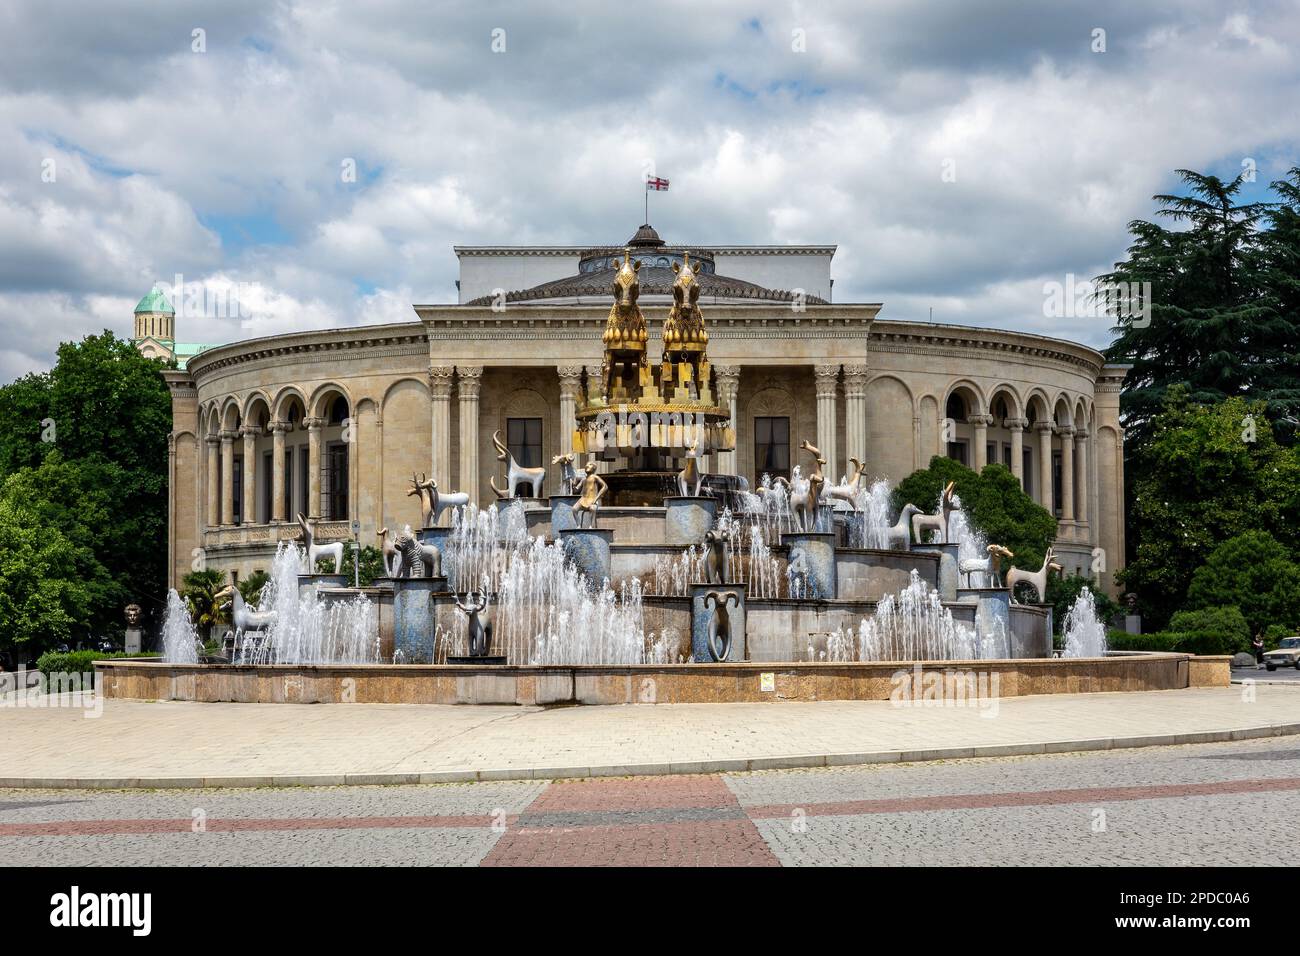 Kutaisi, Georgia, 04.06.21. Colchis Fountain, modern fountain with golden statues of animals, replicas of ancient Georgian figures. Stock Photo